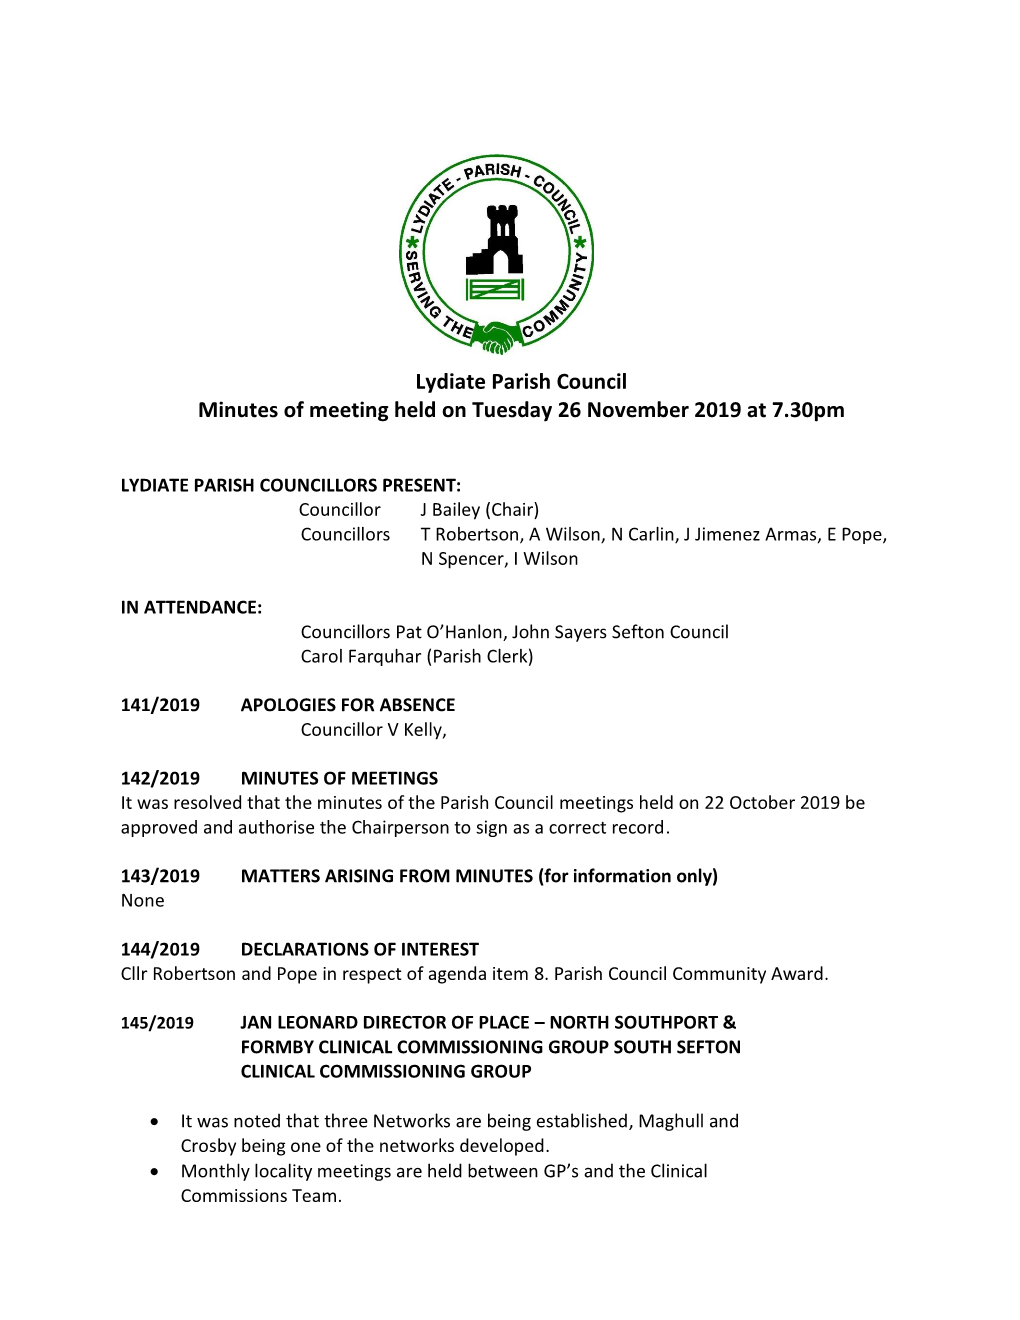 Lydiate Parish Council Minutes of Meeting Held on Tuesday 26 November 2019 at 7.30Pm